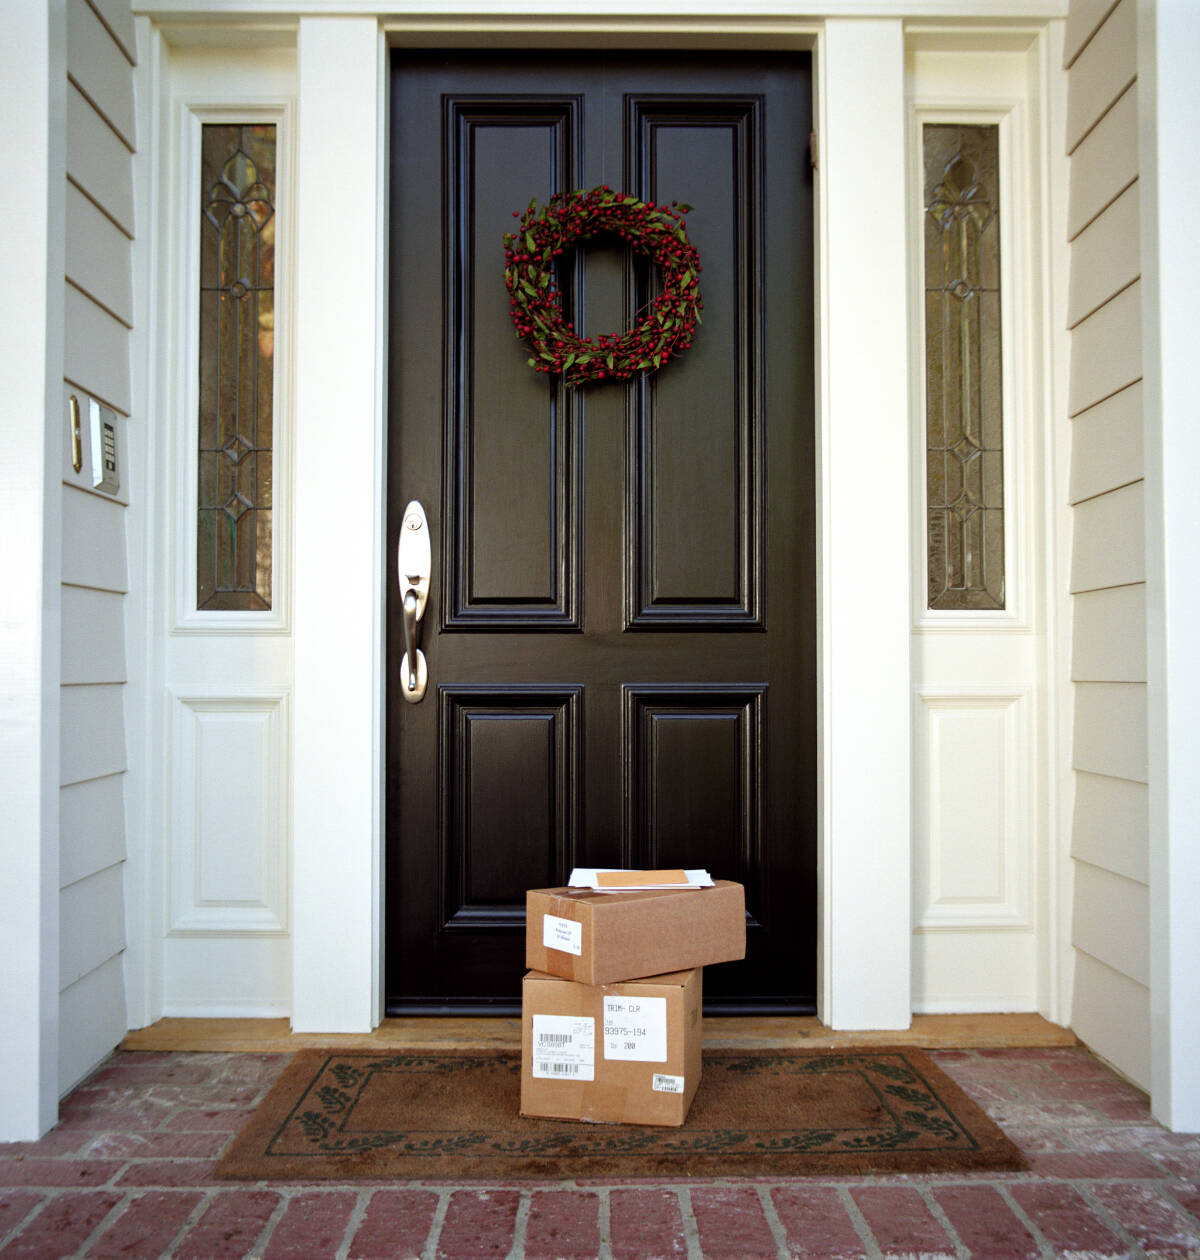 To avoid mail and package theft, try to pick up your mail and packages promptly. Stock photo
To avoid mail and package theft, try to pick up your mail and packages promptly.